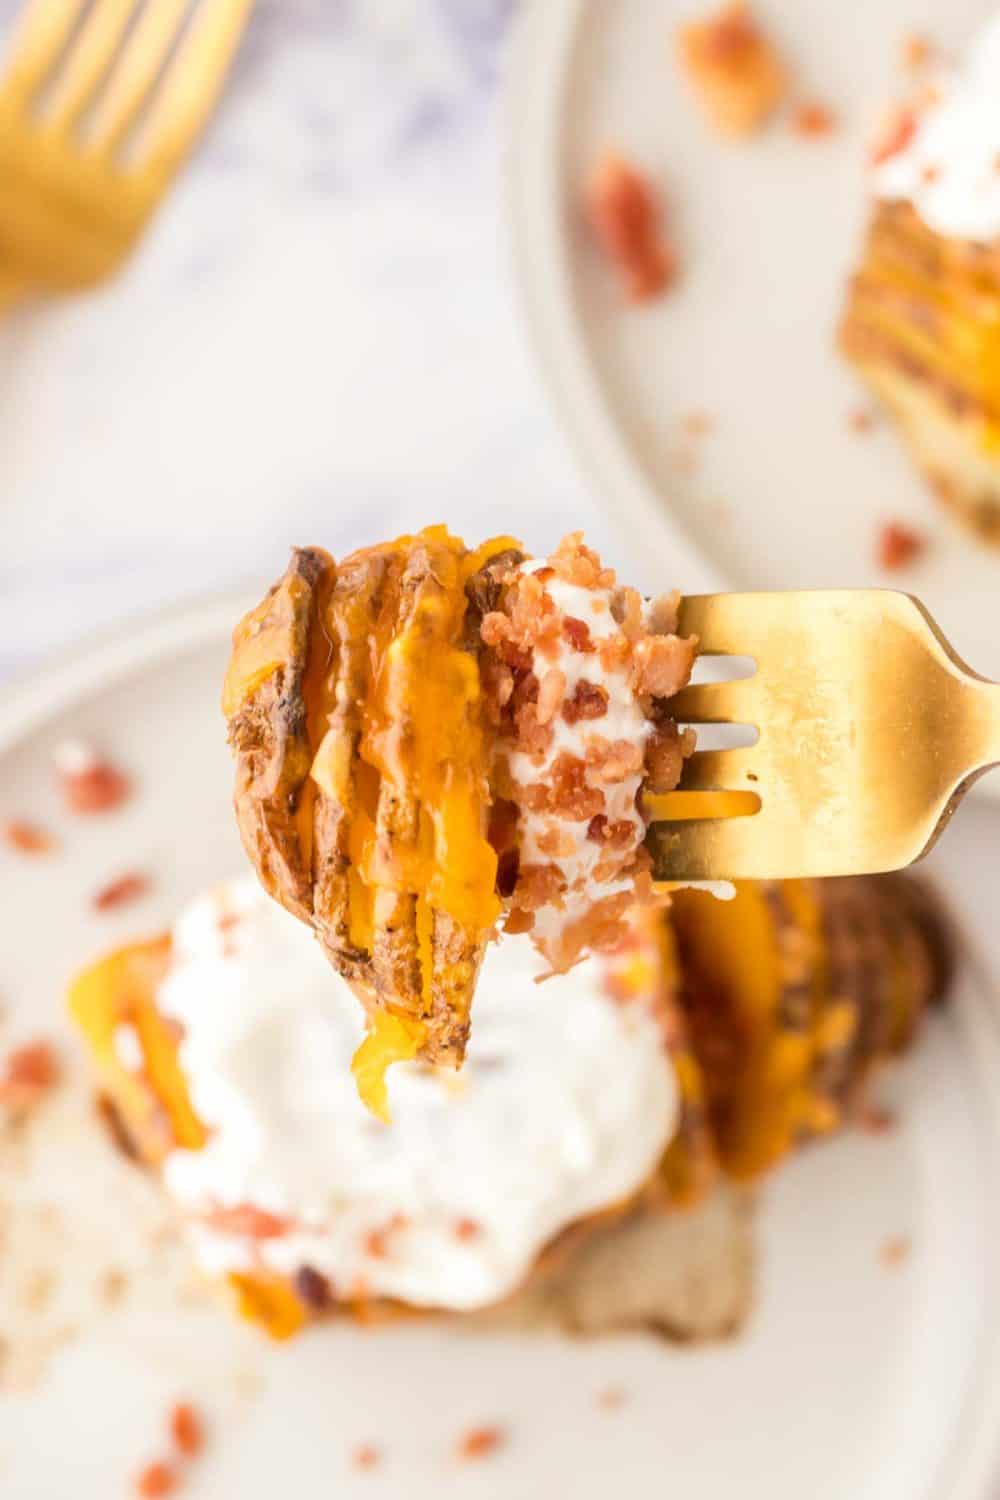 POV forkful of hasselback potatoes with melted cheese with sour cream and bacon bits